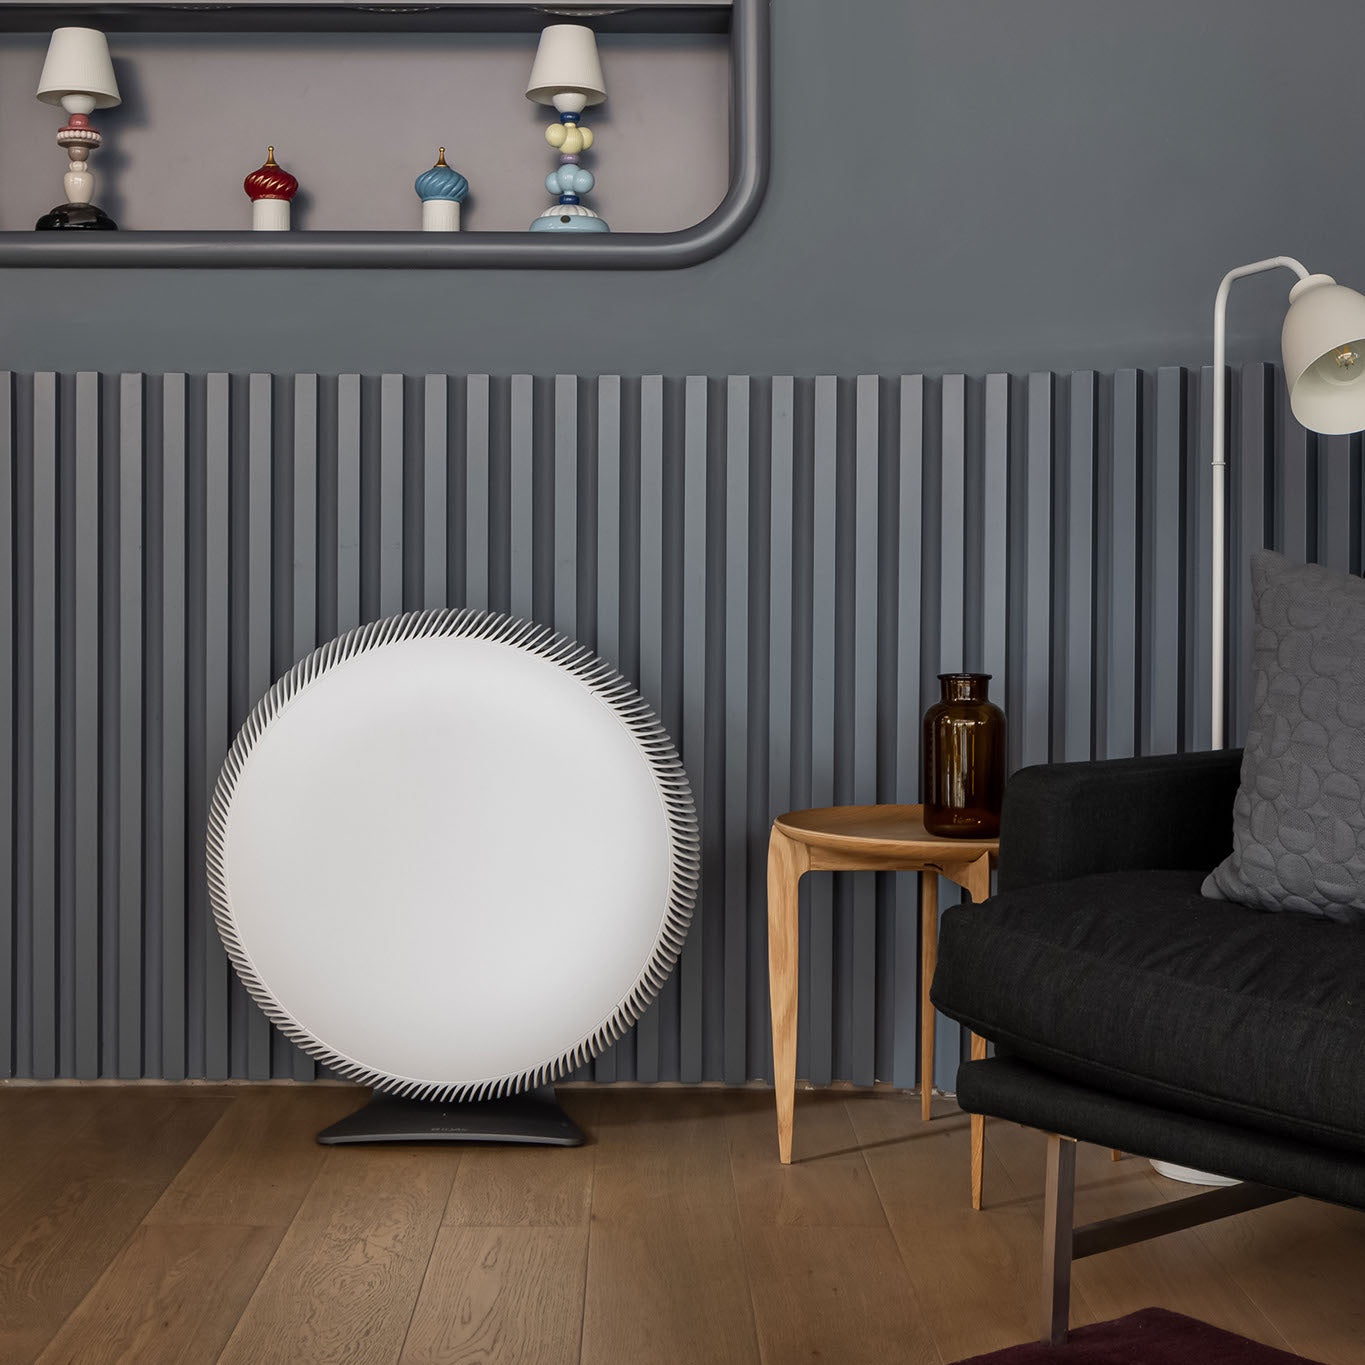 AtemX at Home air purifier